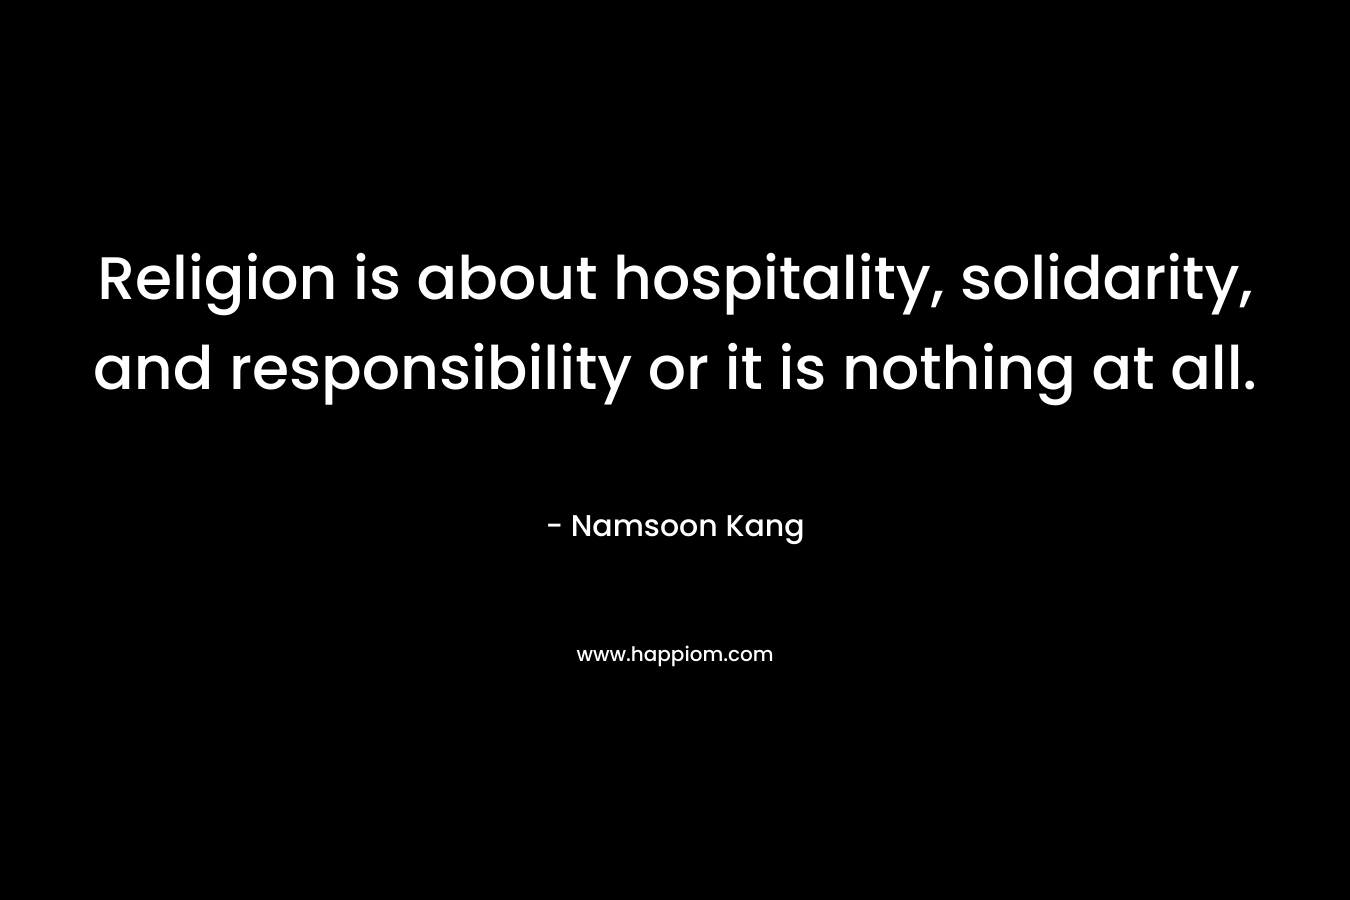 Religion is about hospitality, solidarity, and responsibility or it is nothing at all. – Namsoon Kang